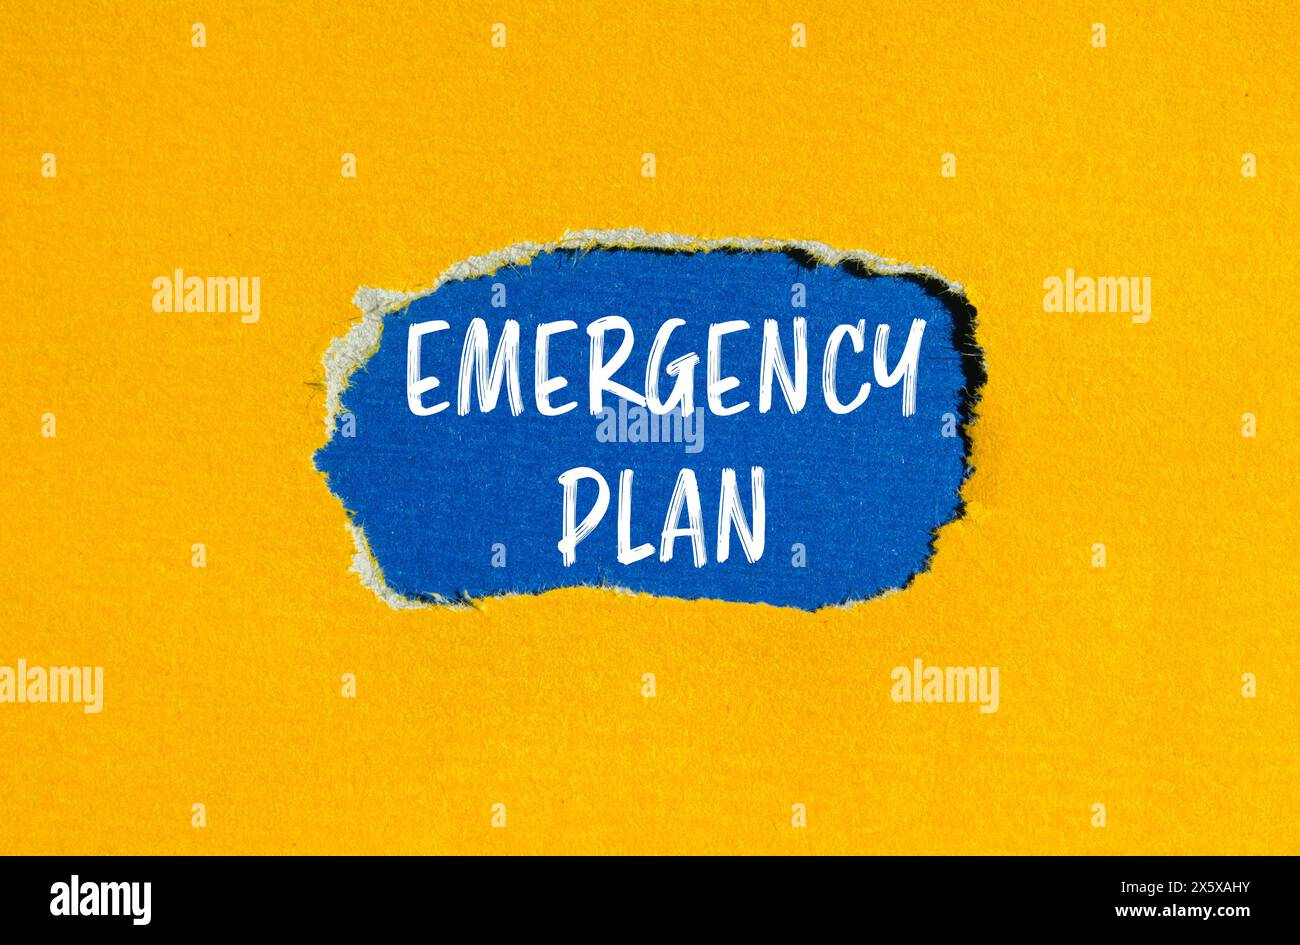 Emergency plan words written on ripped yellow paper with blue background. Conceptual emergency plan symbol. Copy space. Stock Photo